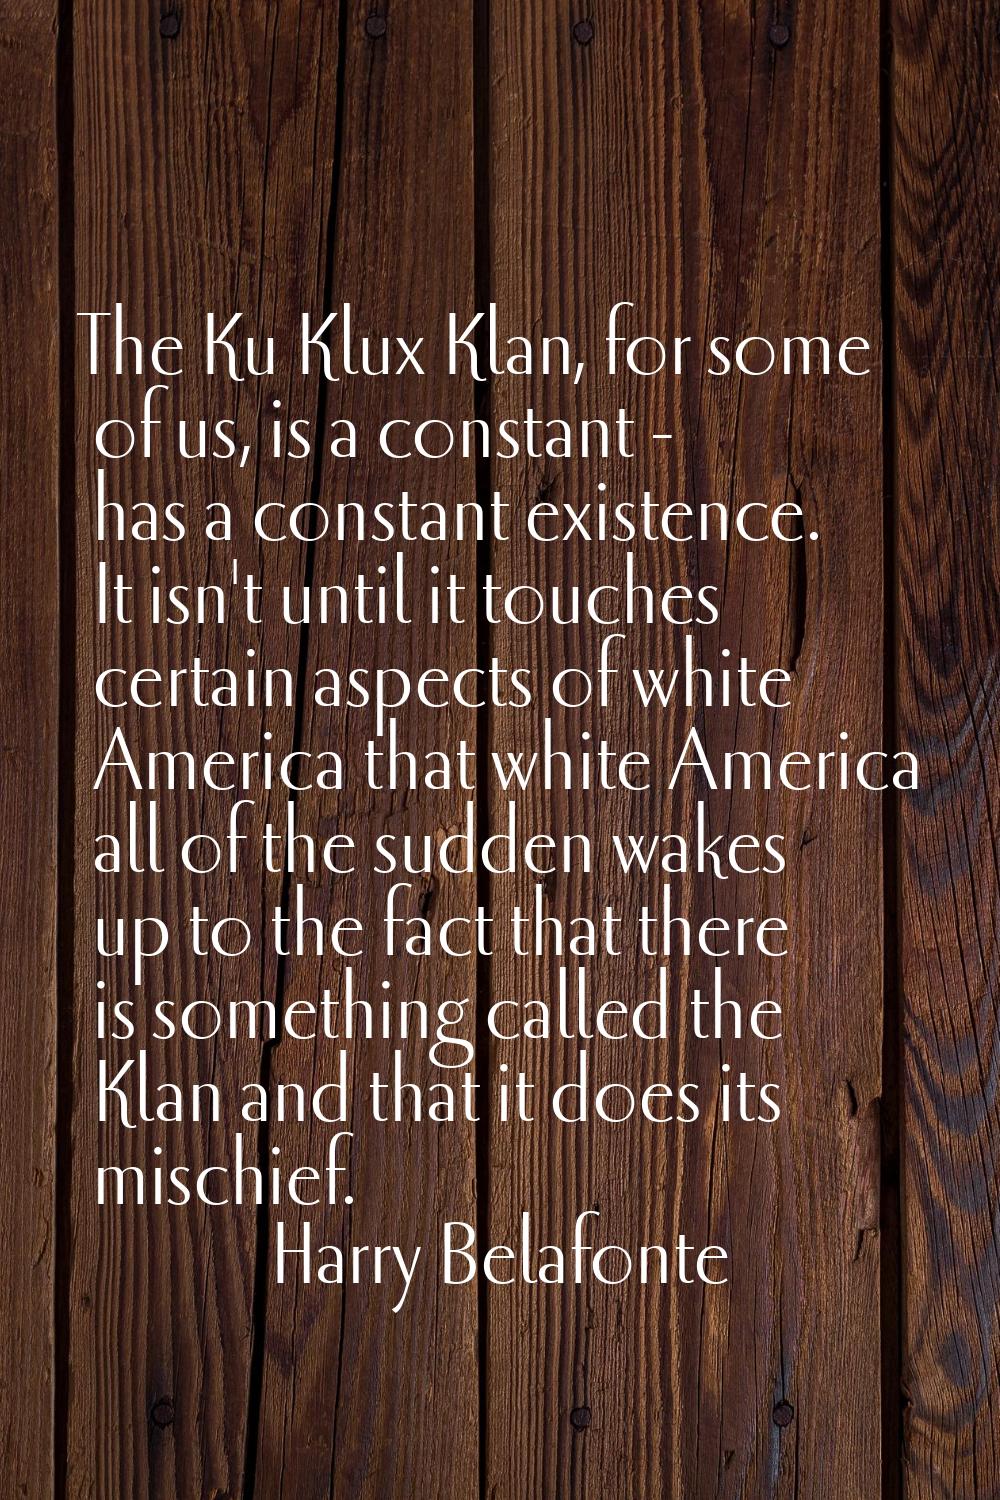 The Ku Klux Klan, for some of us, is a constant - has a constant existence. It isn't until it touch